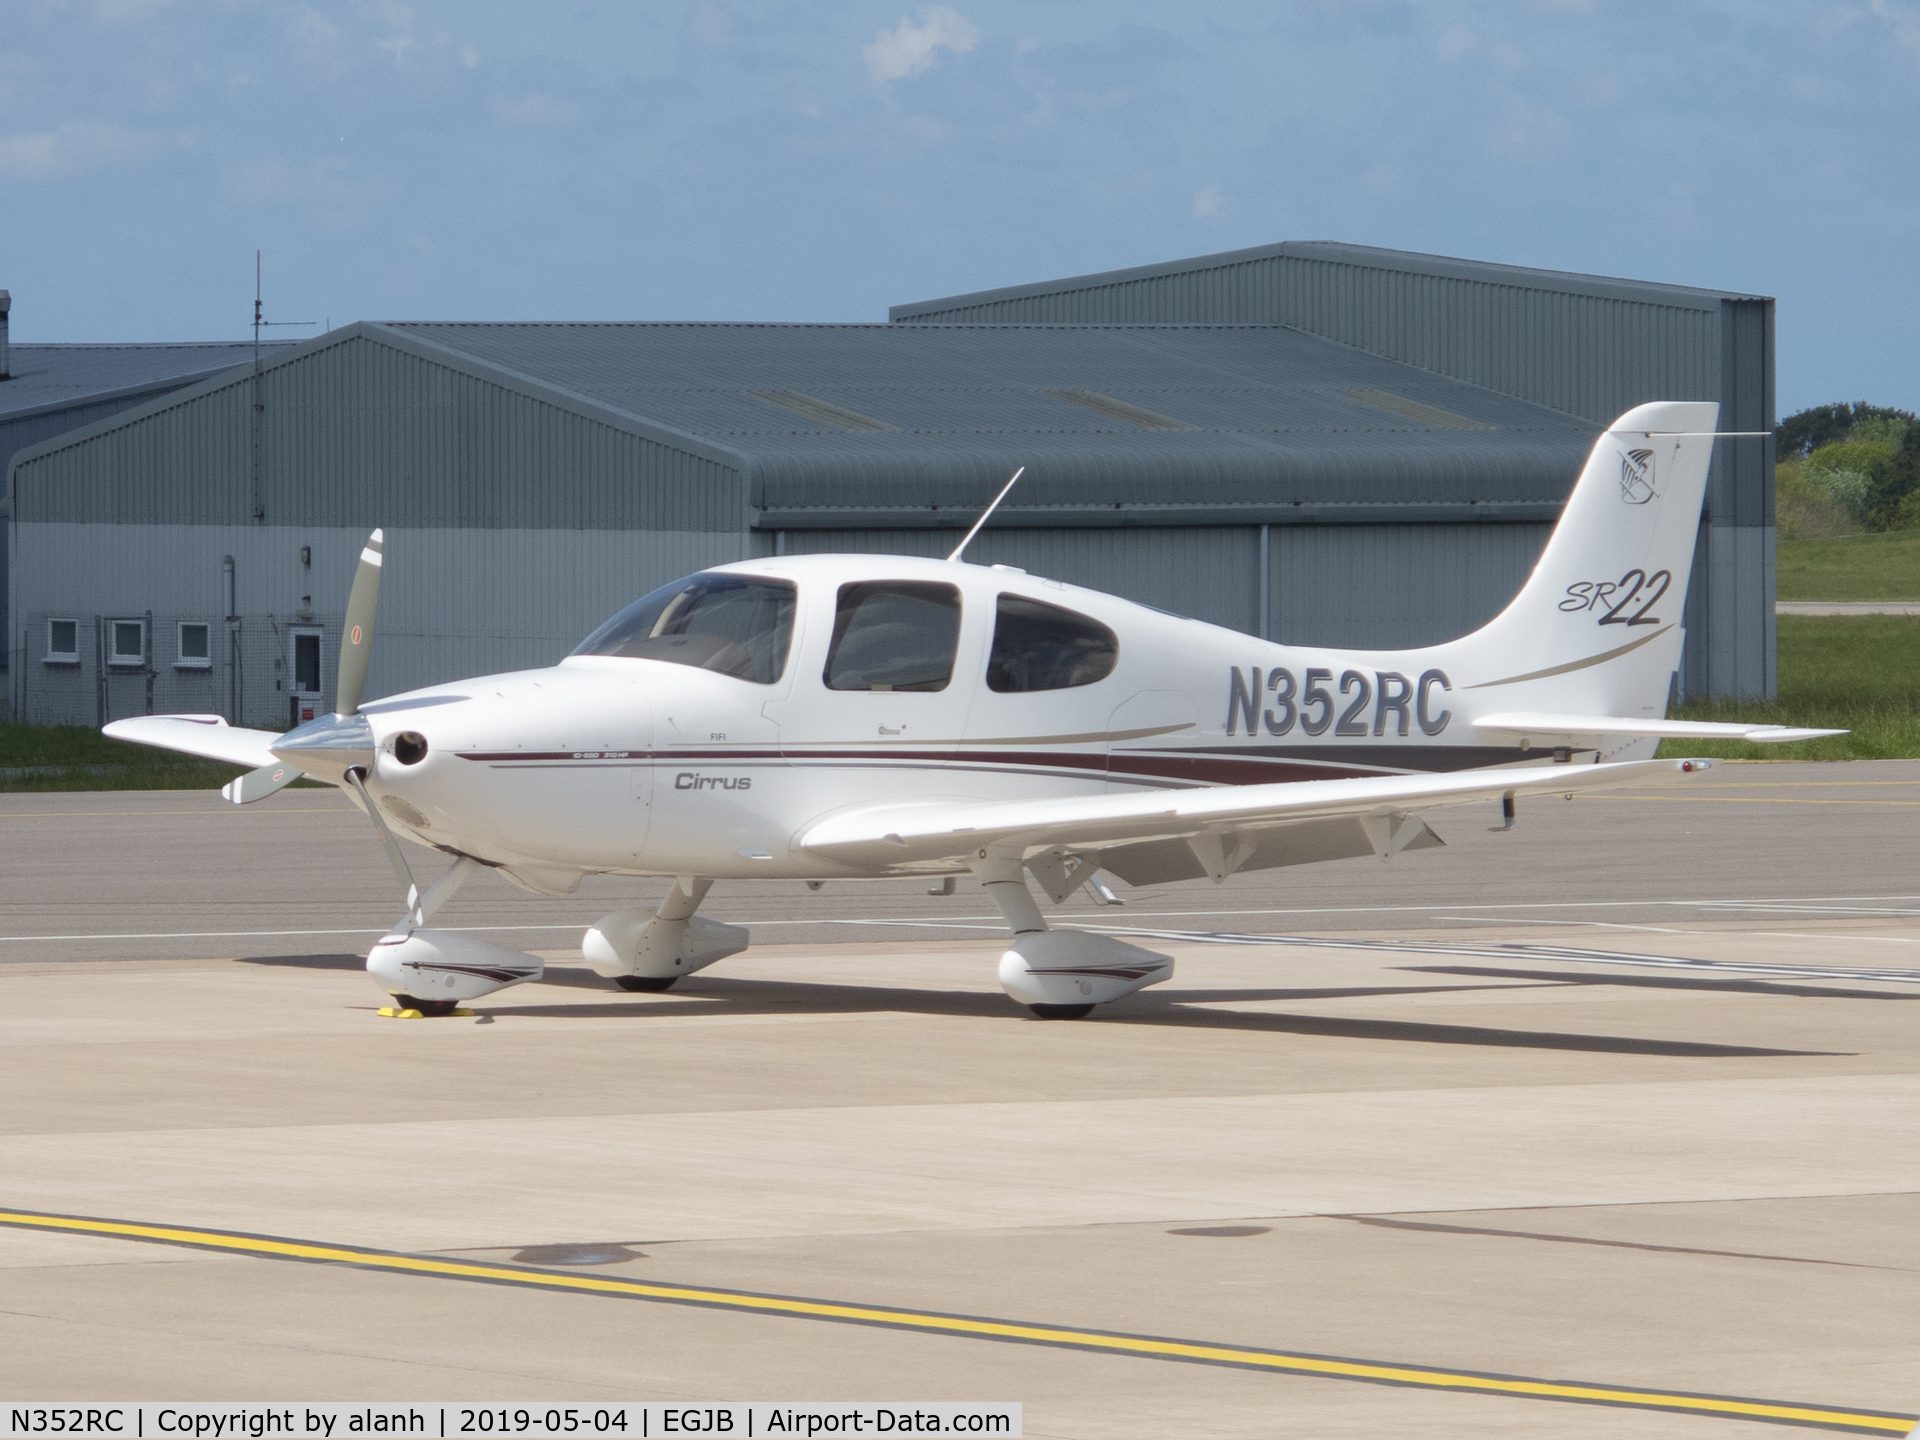 N352RC, 2002 Cirrus SR22 C/N 0186, Parked on the west apron, Guernsey